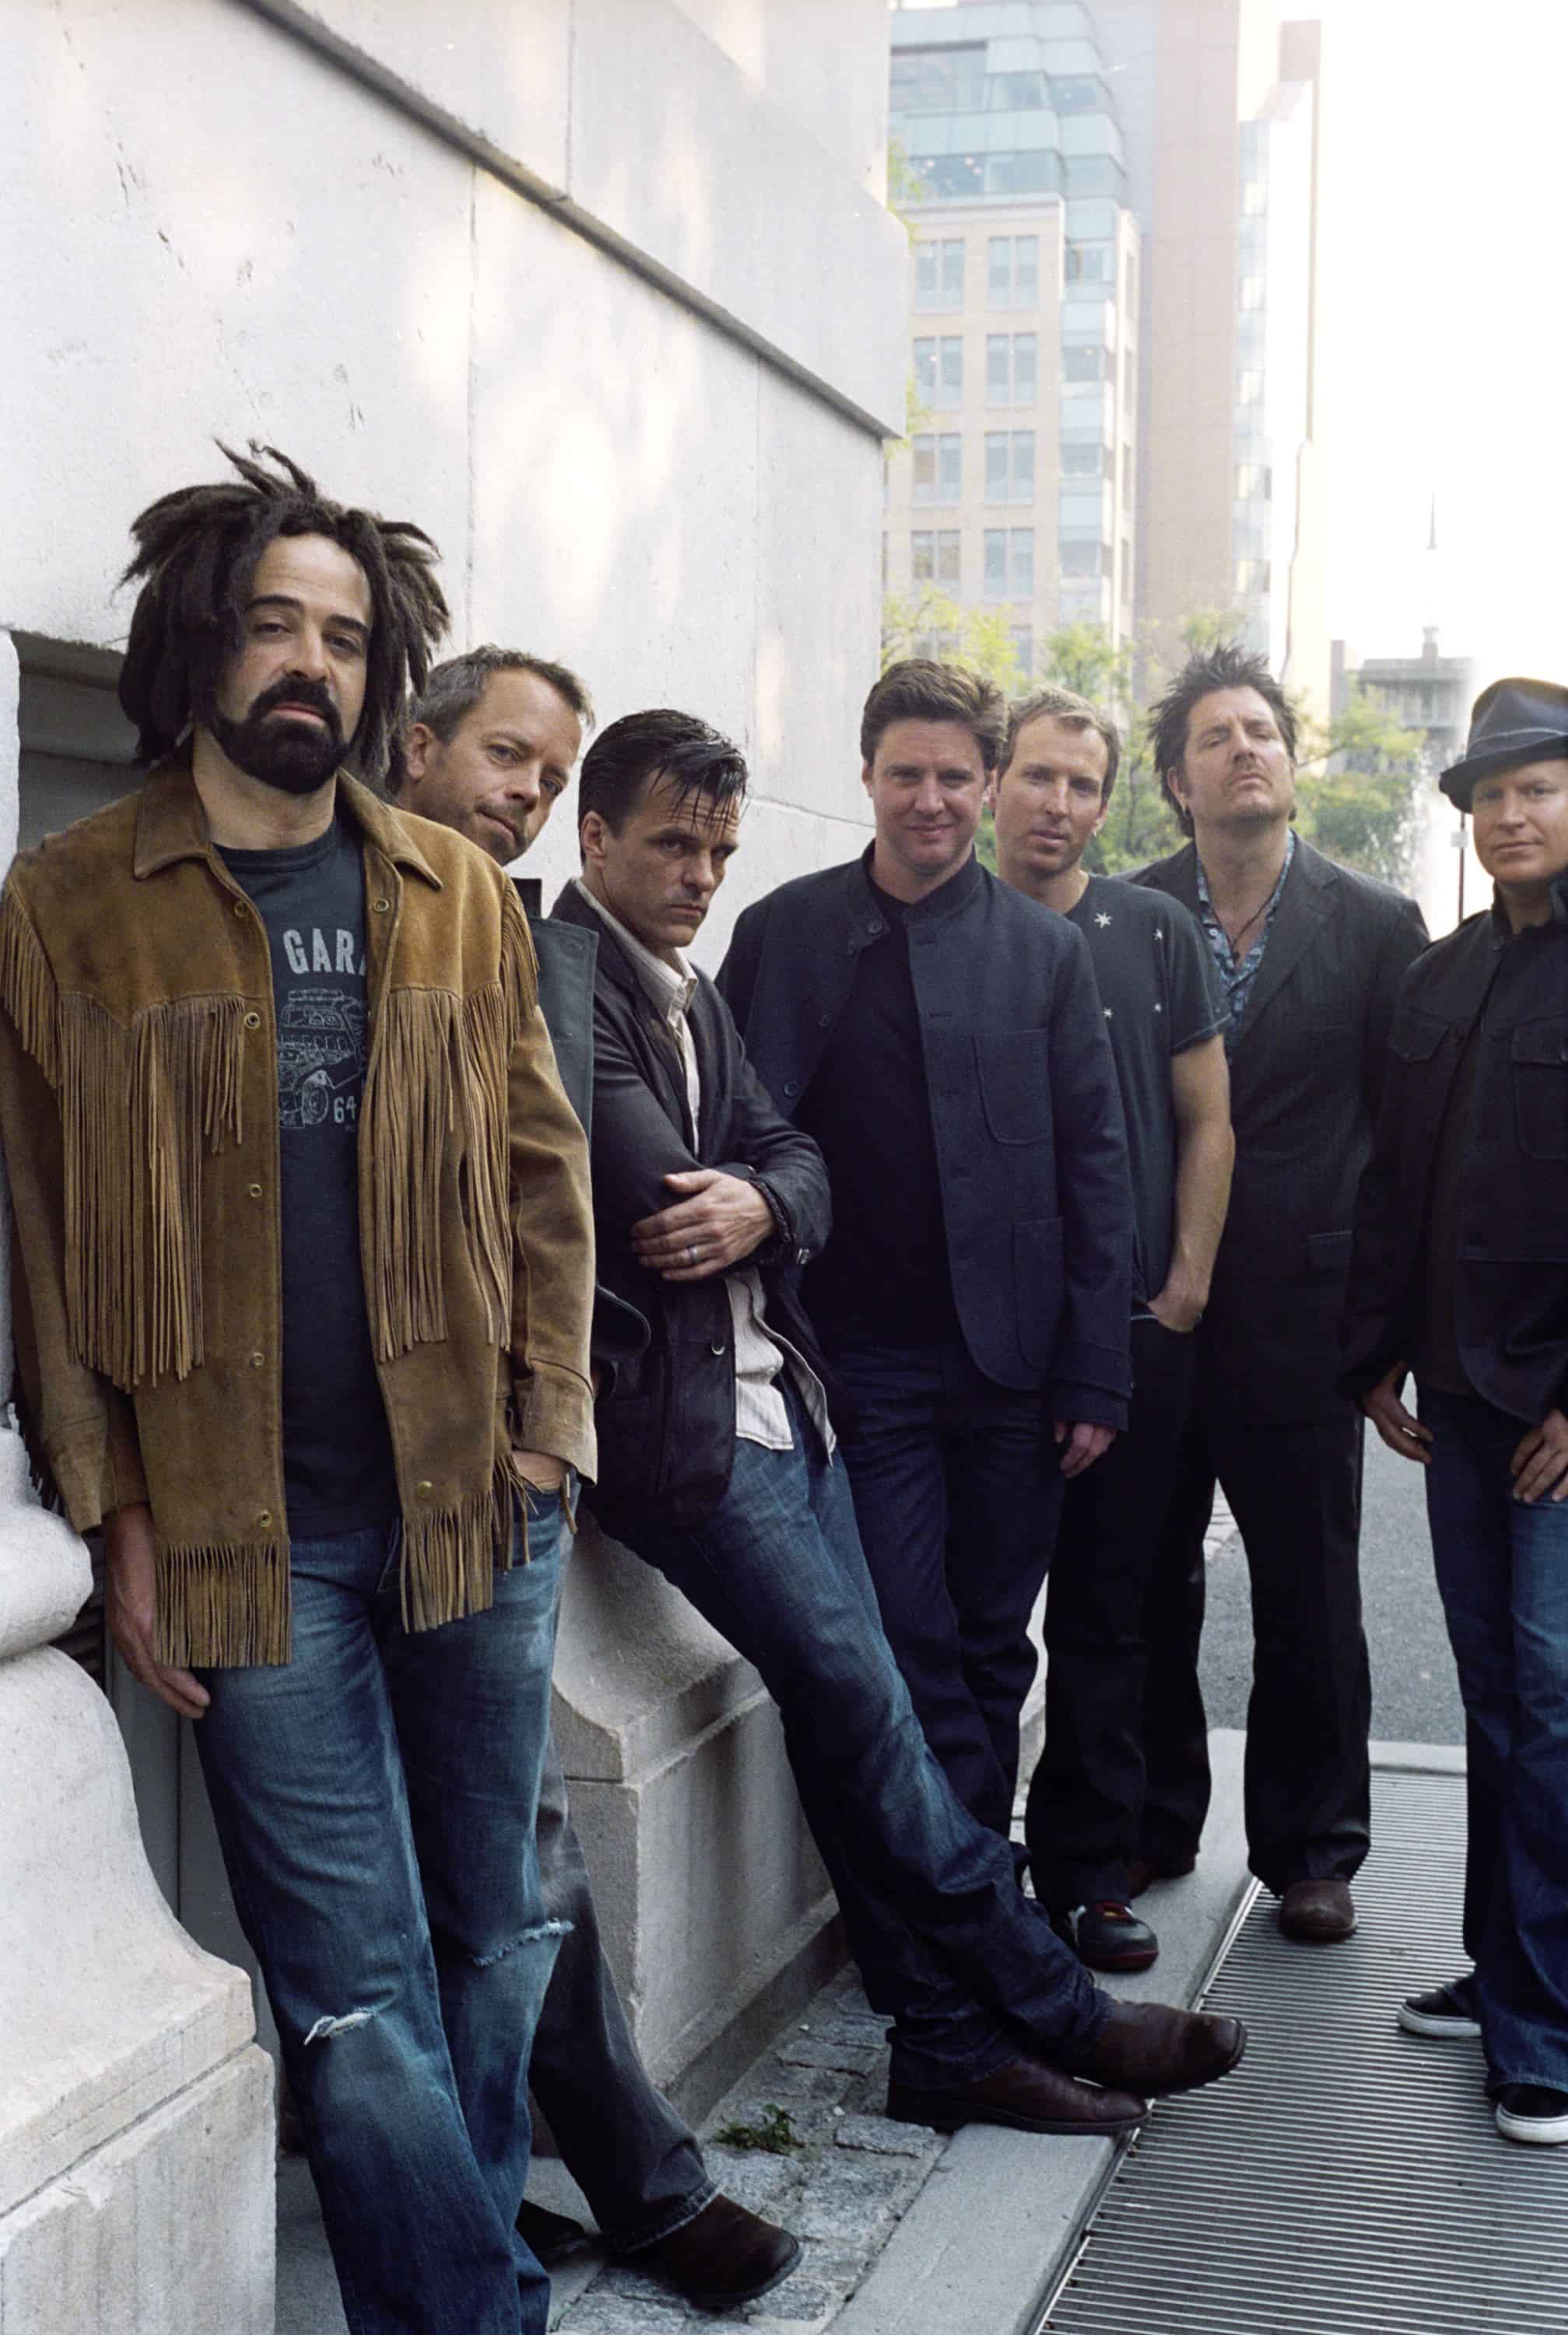 Counting Crows 2013 UK Tour in April